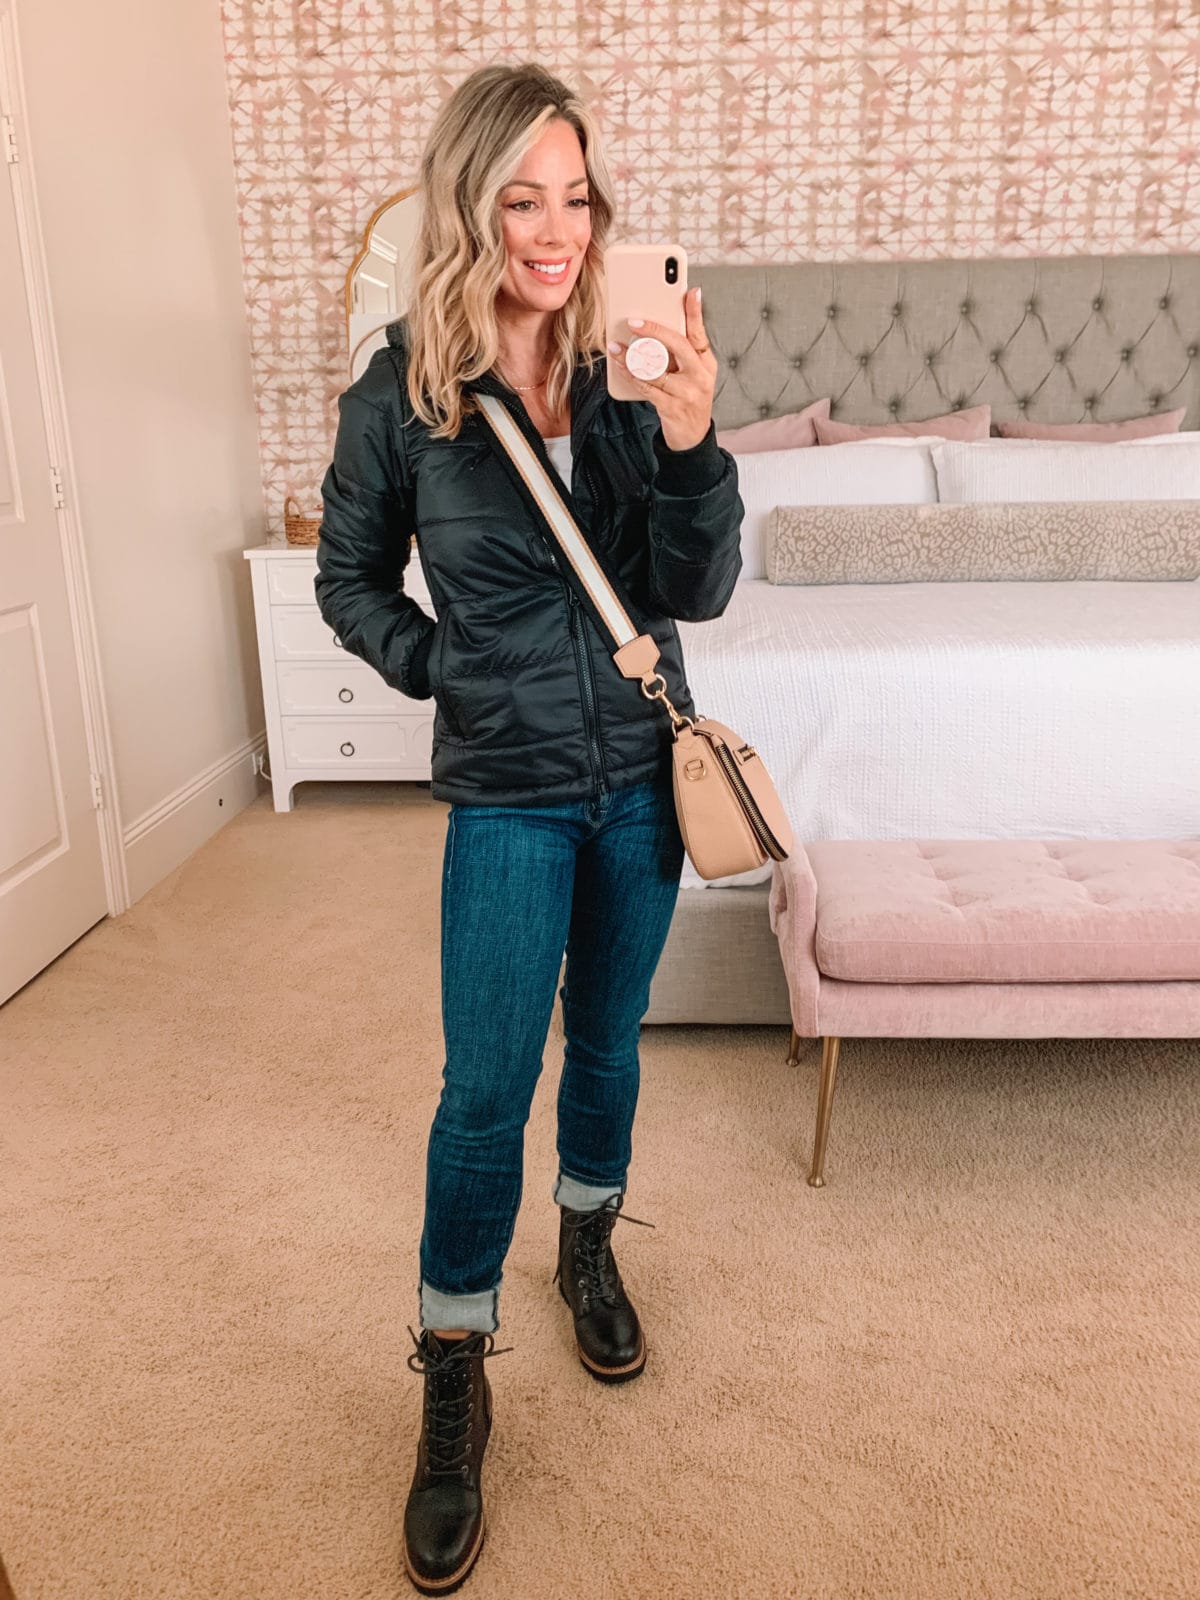 4 Fall Outfits from the Nordstrom Anniversary Sale — Hello Adams Family